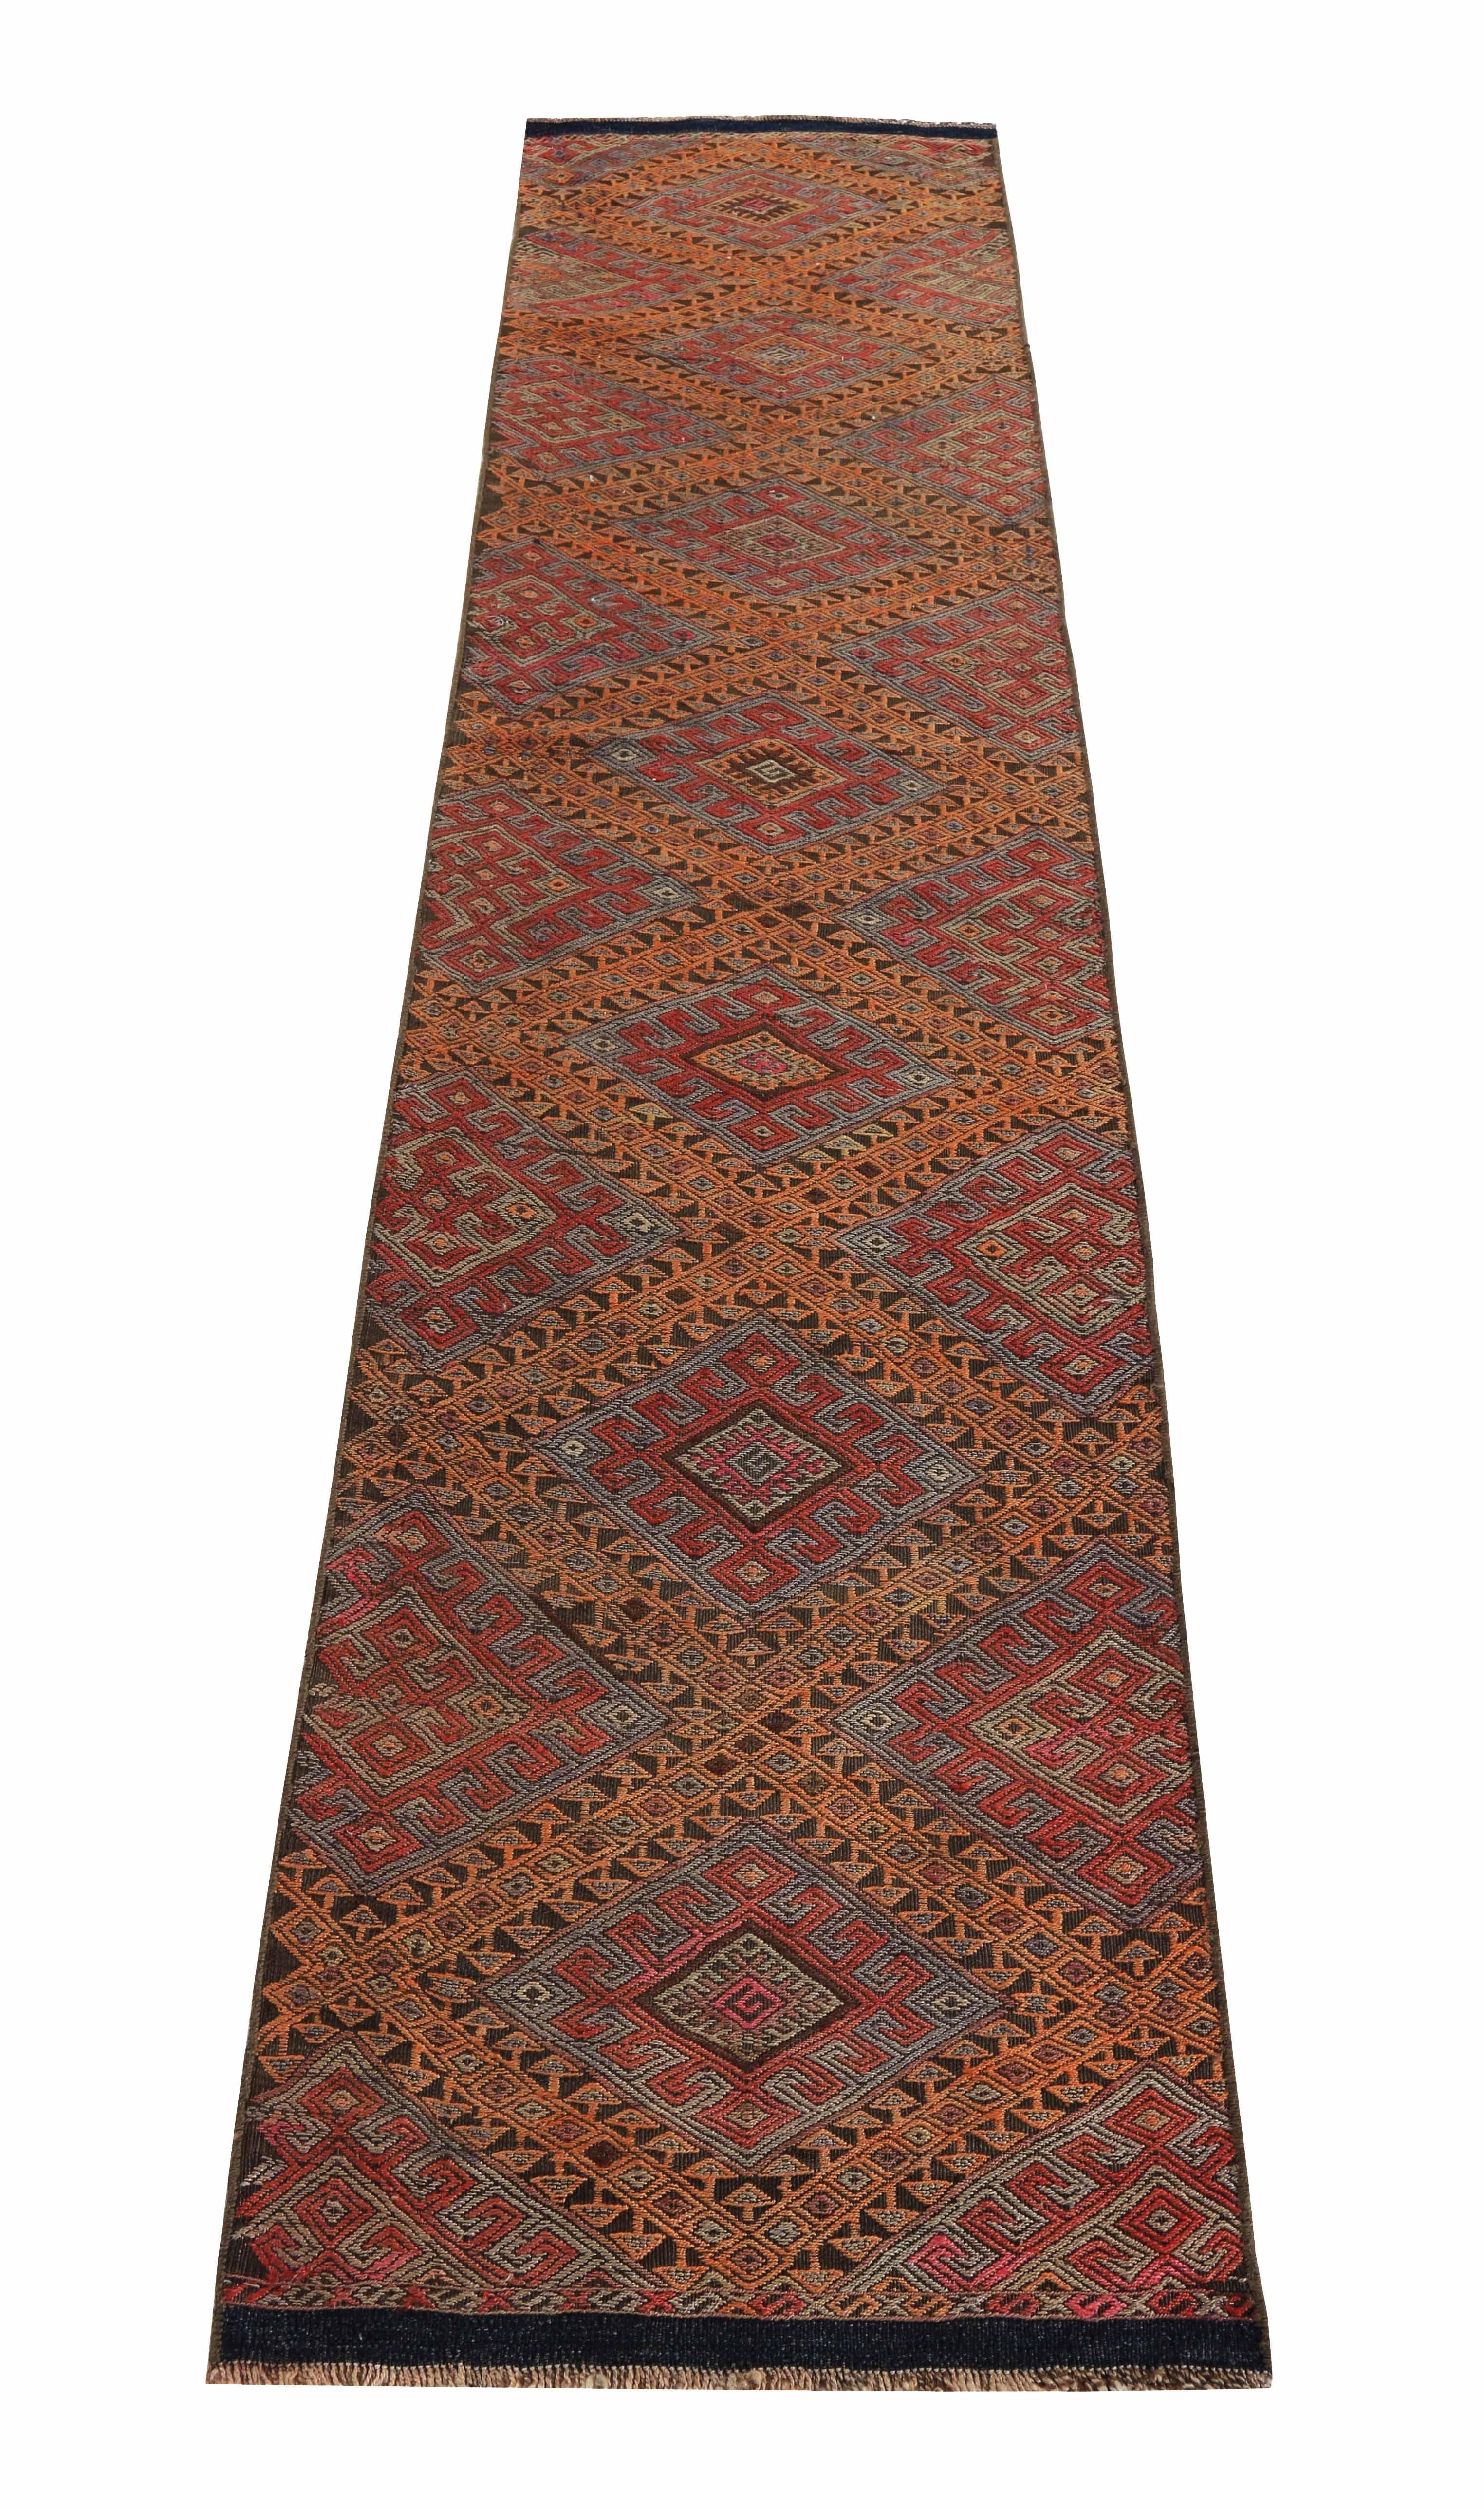 Modern Turkish rug handwoven from the finest sheep’s wool and colored with all-natural vegetable dyes that are safe for humans and pets. It’s a traditional Kilim flat-weave design featuring orange and red tribal patterns. It’s a stunning piece to